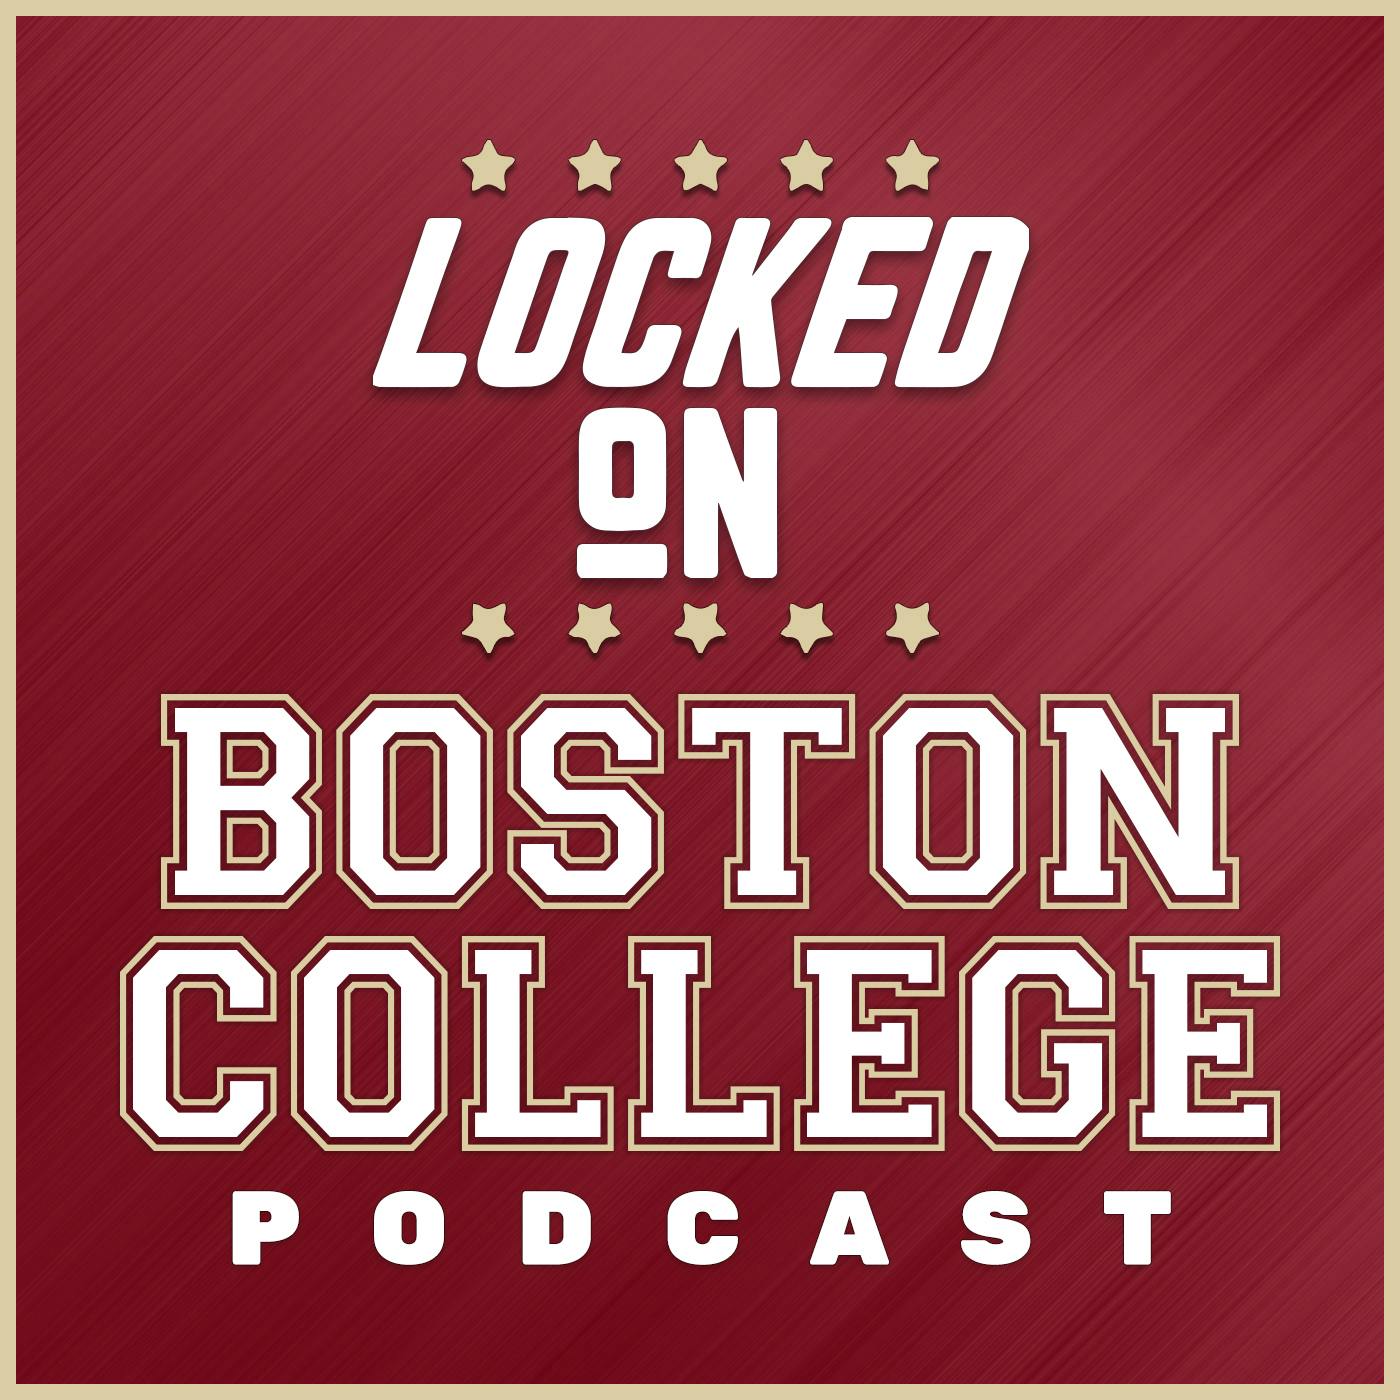 Will Newest Round of Conference Realignment Signal the End of Boston College Football?